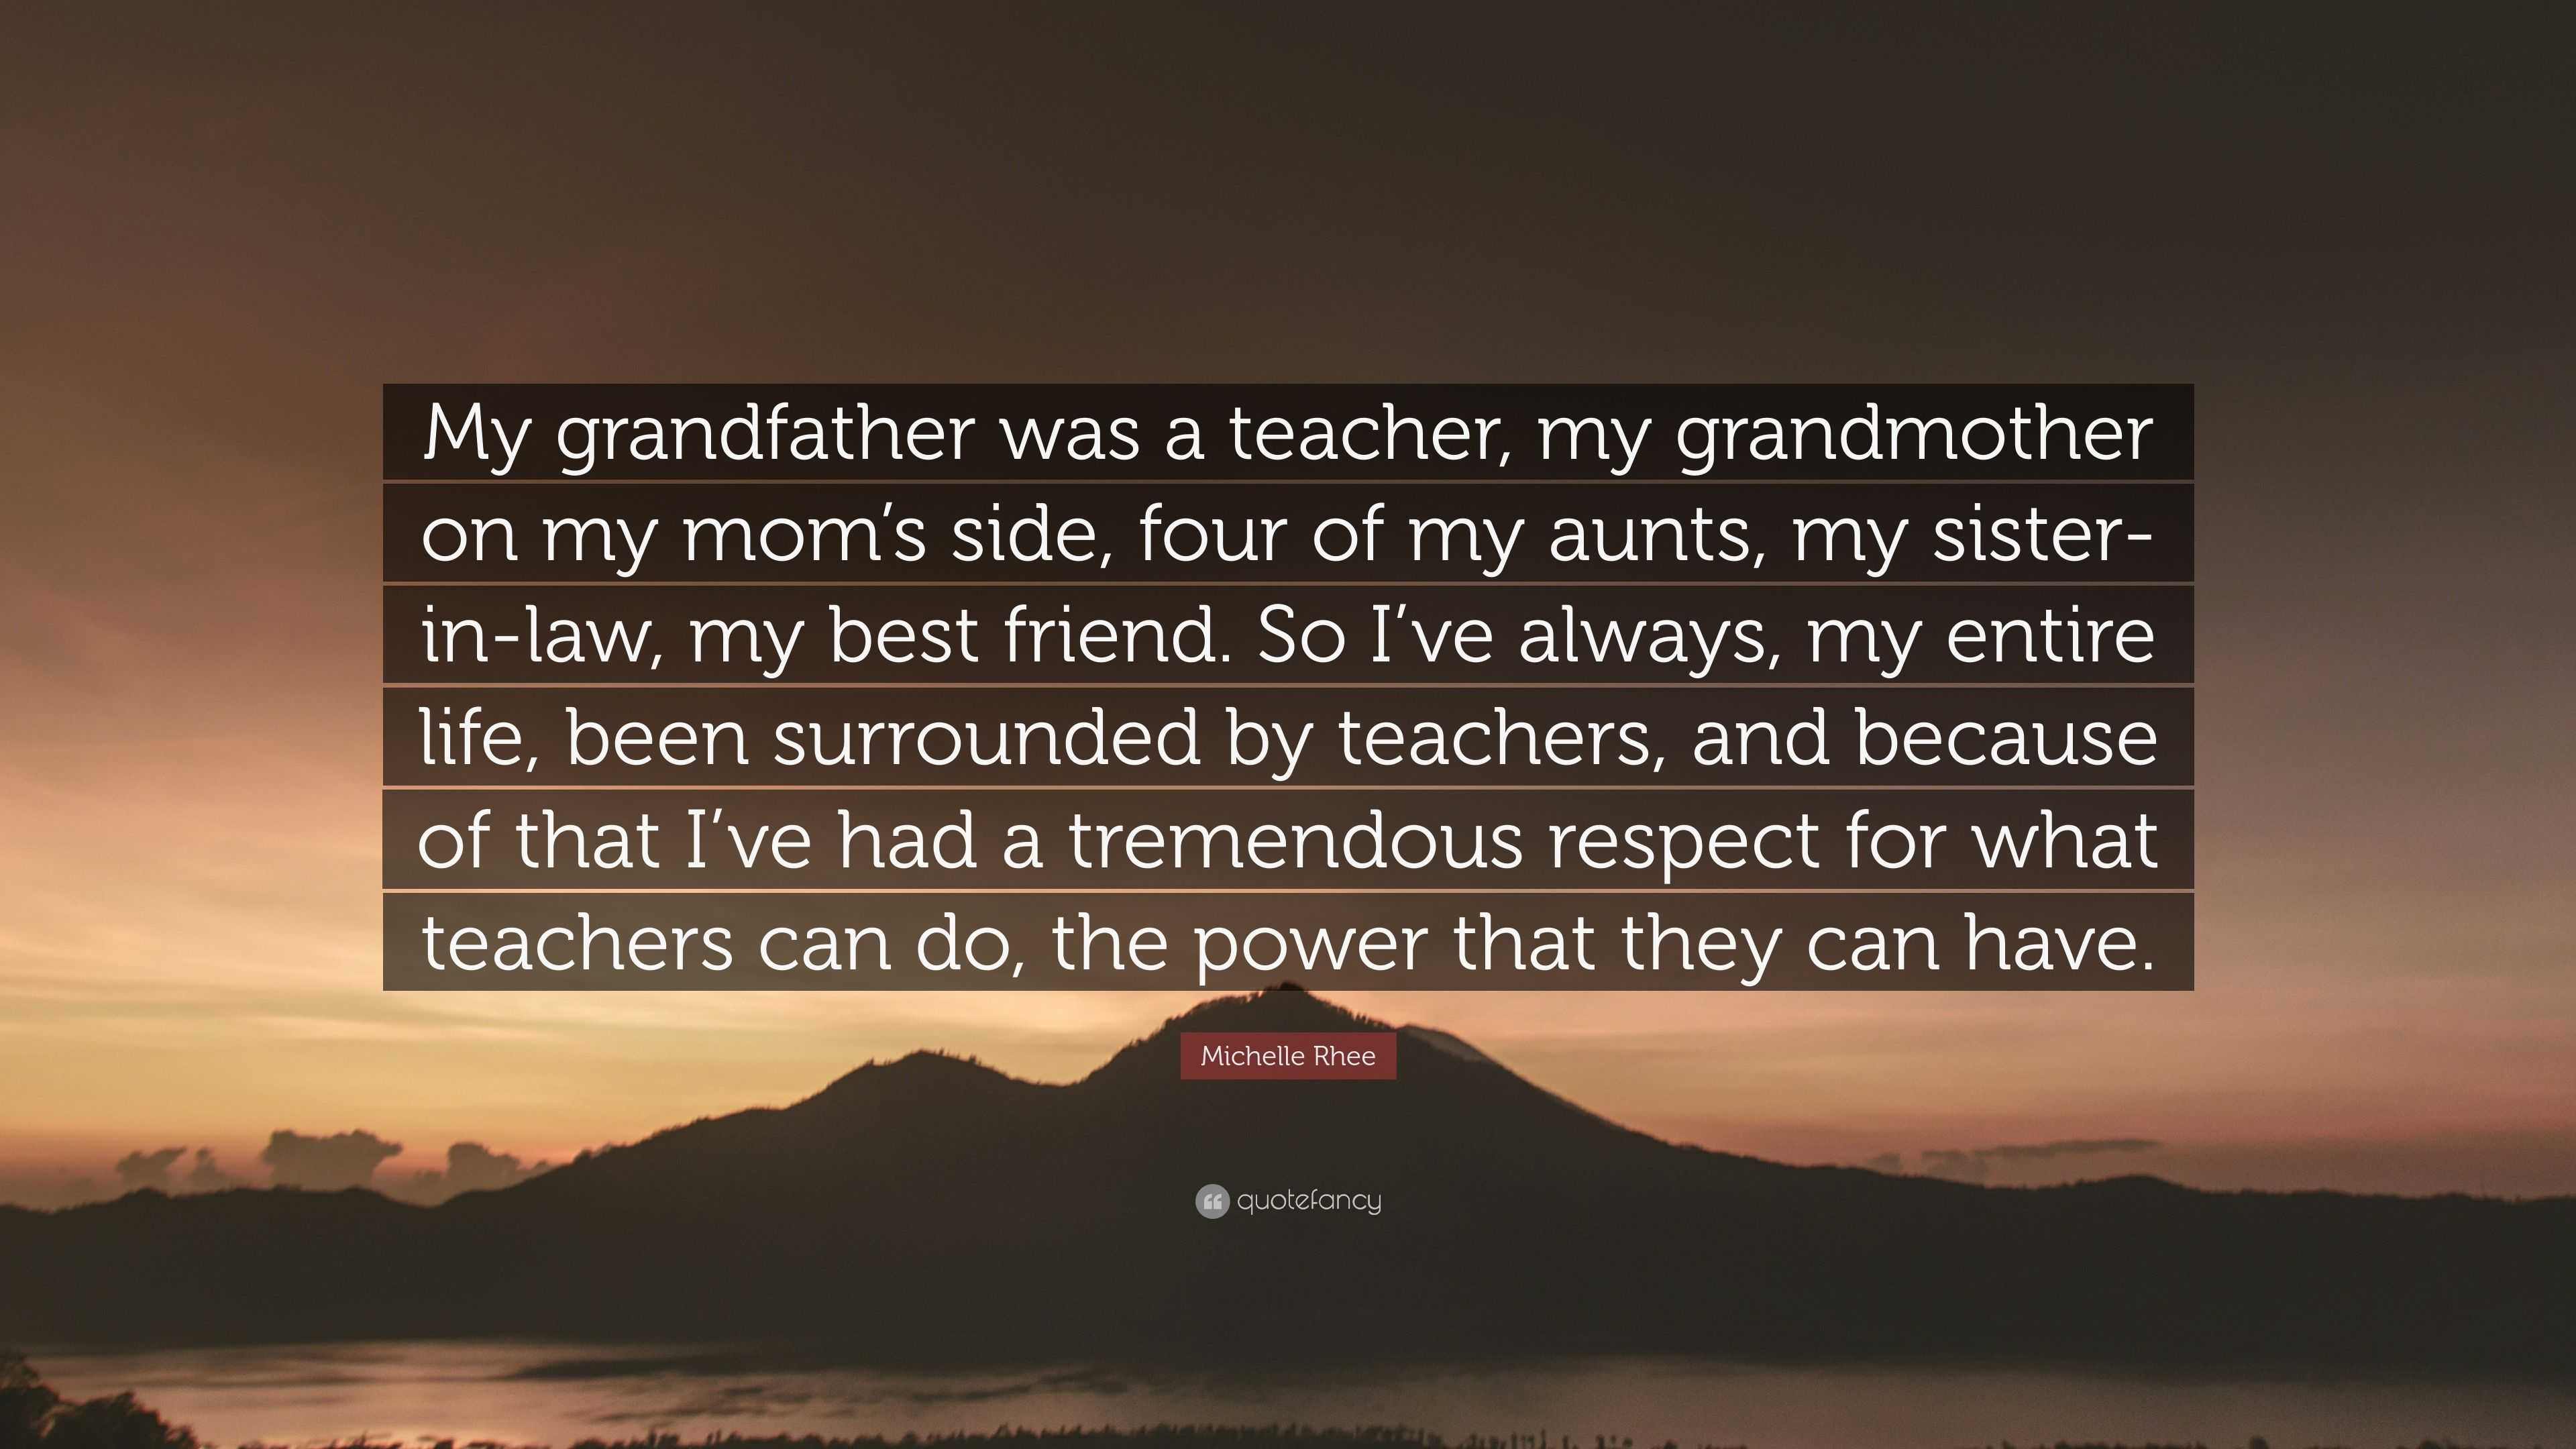 Michelle Rhee Quote: “My grandfather was a teacher, my grandmother on ...